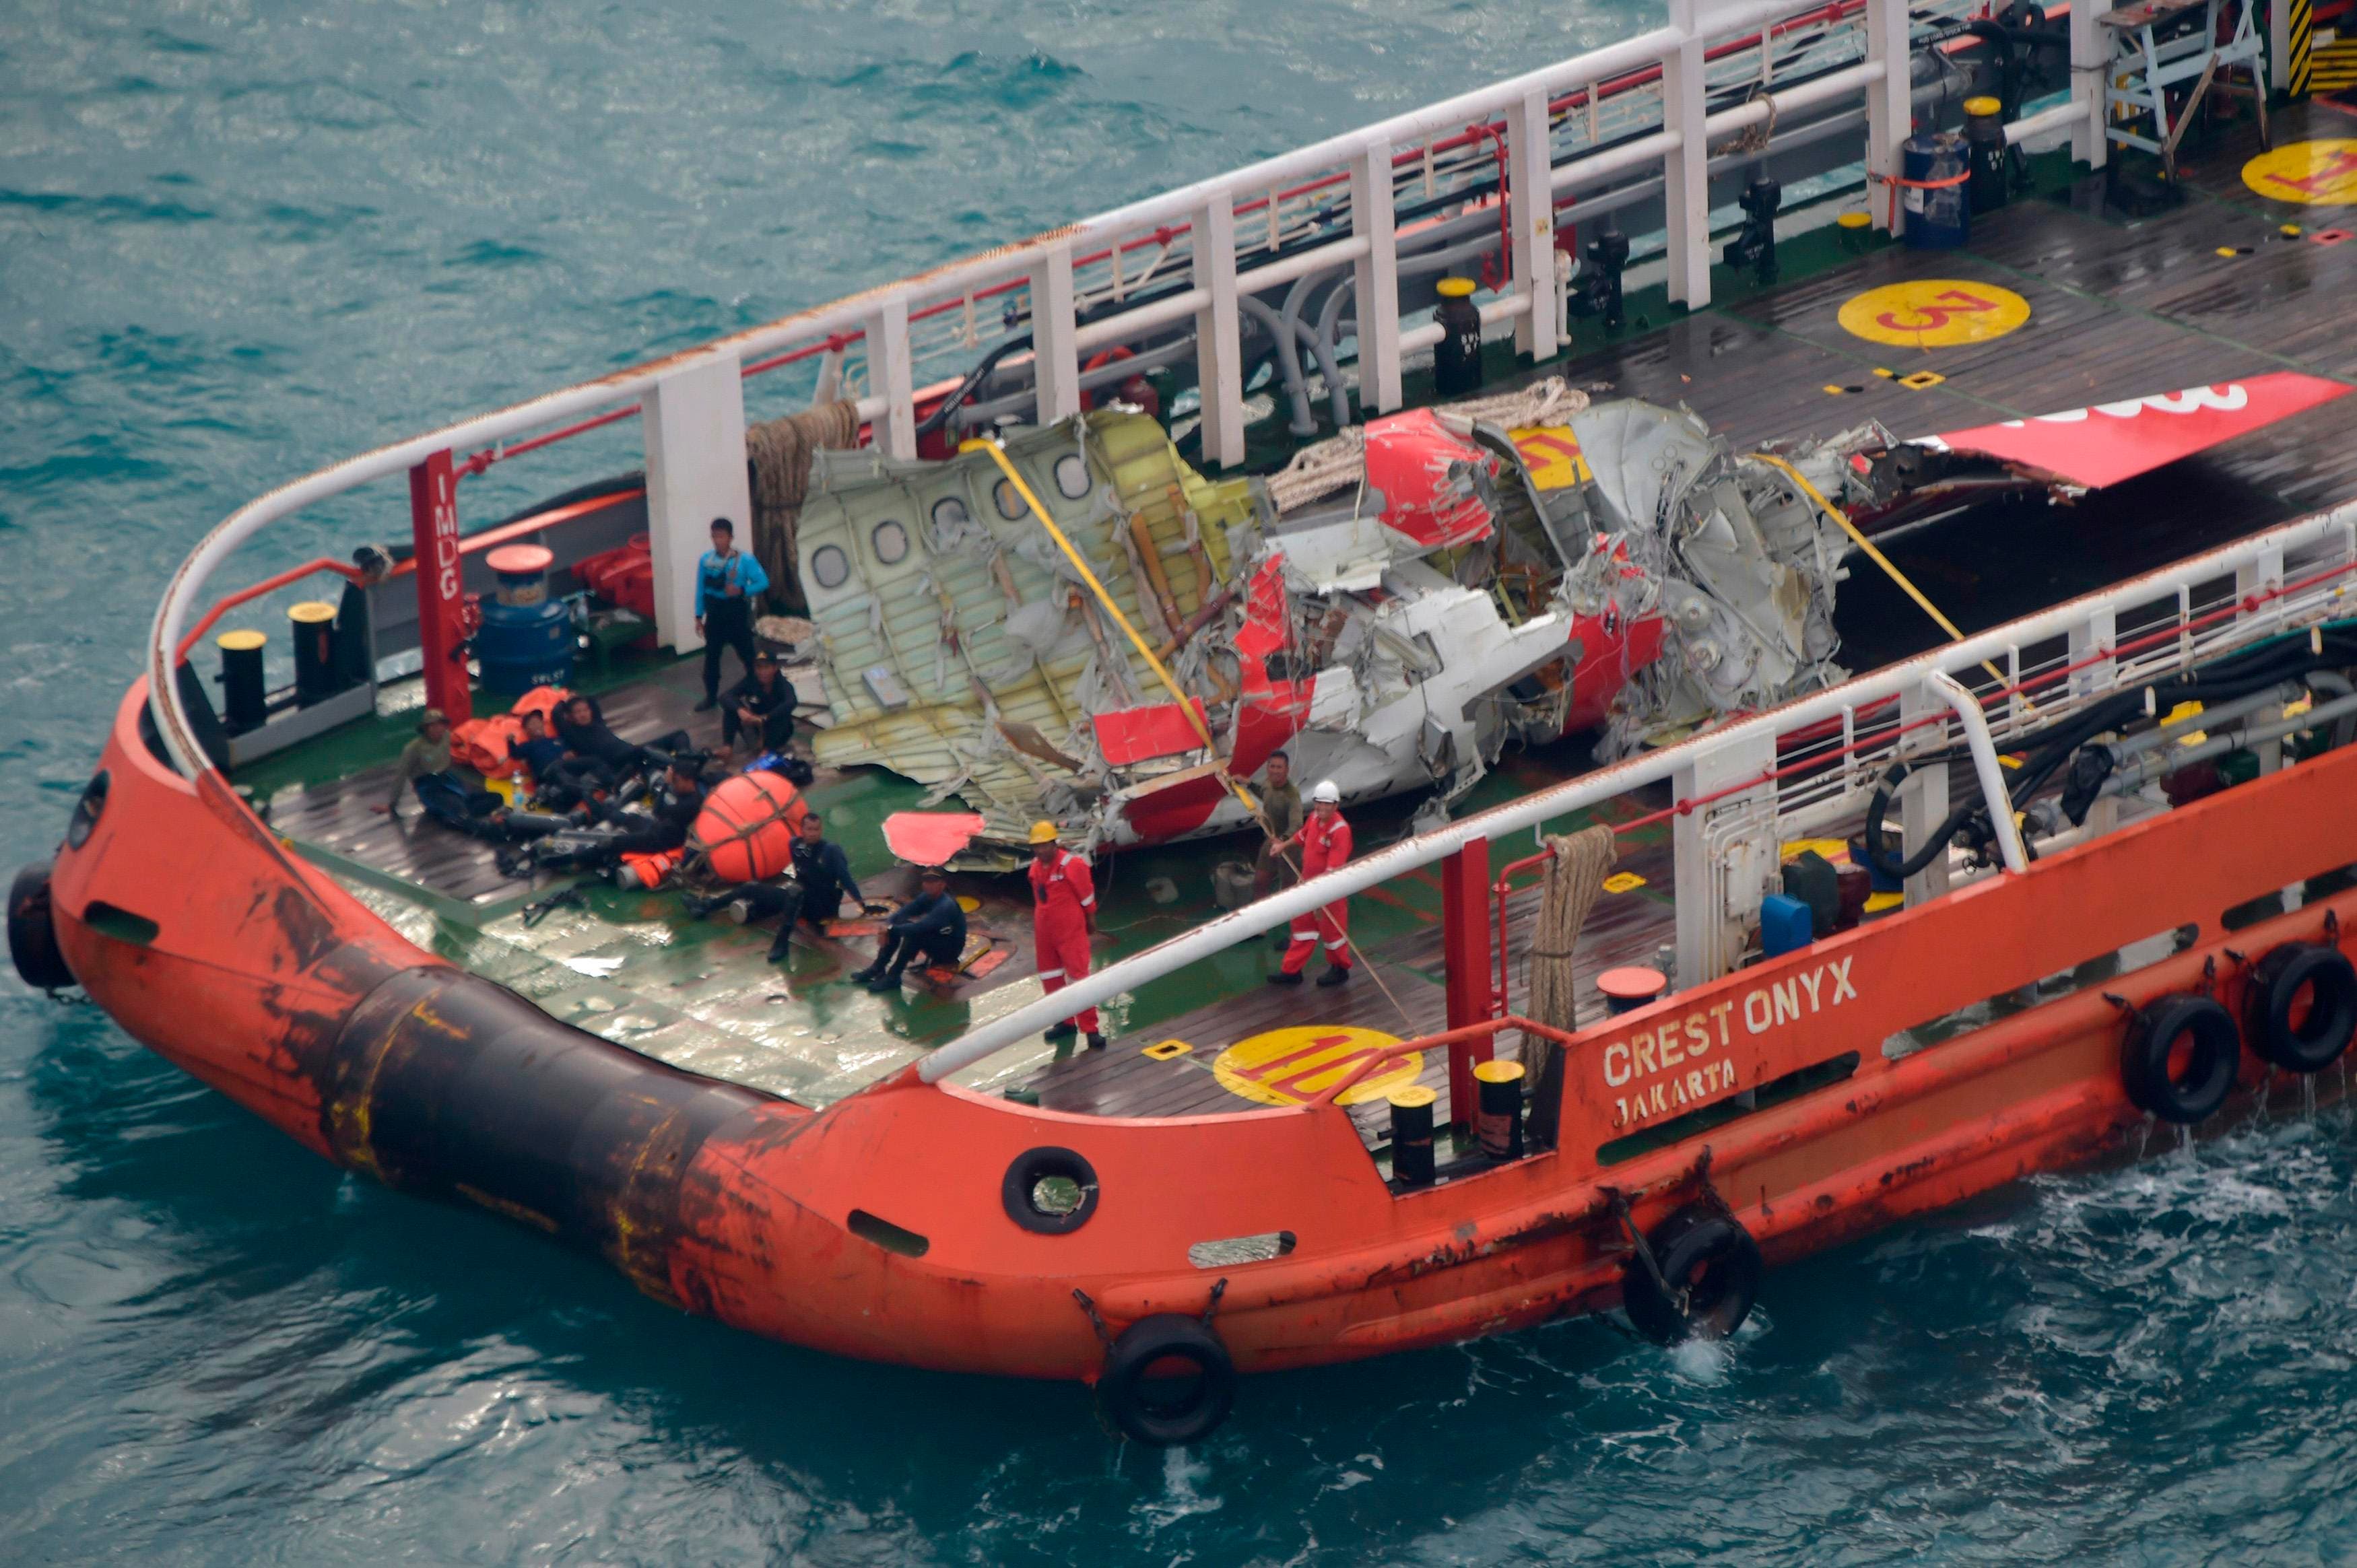 Sonar ‘detects’ crashed AirAsia's fuselage